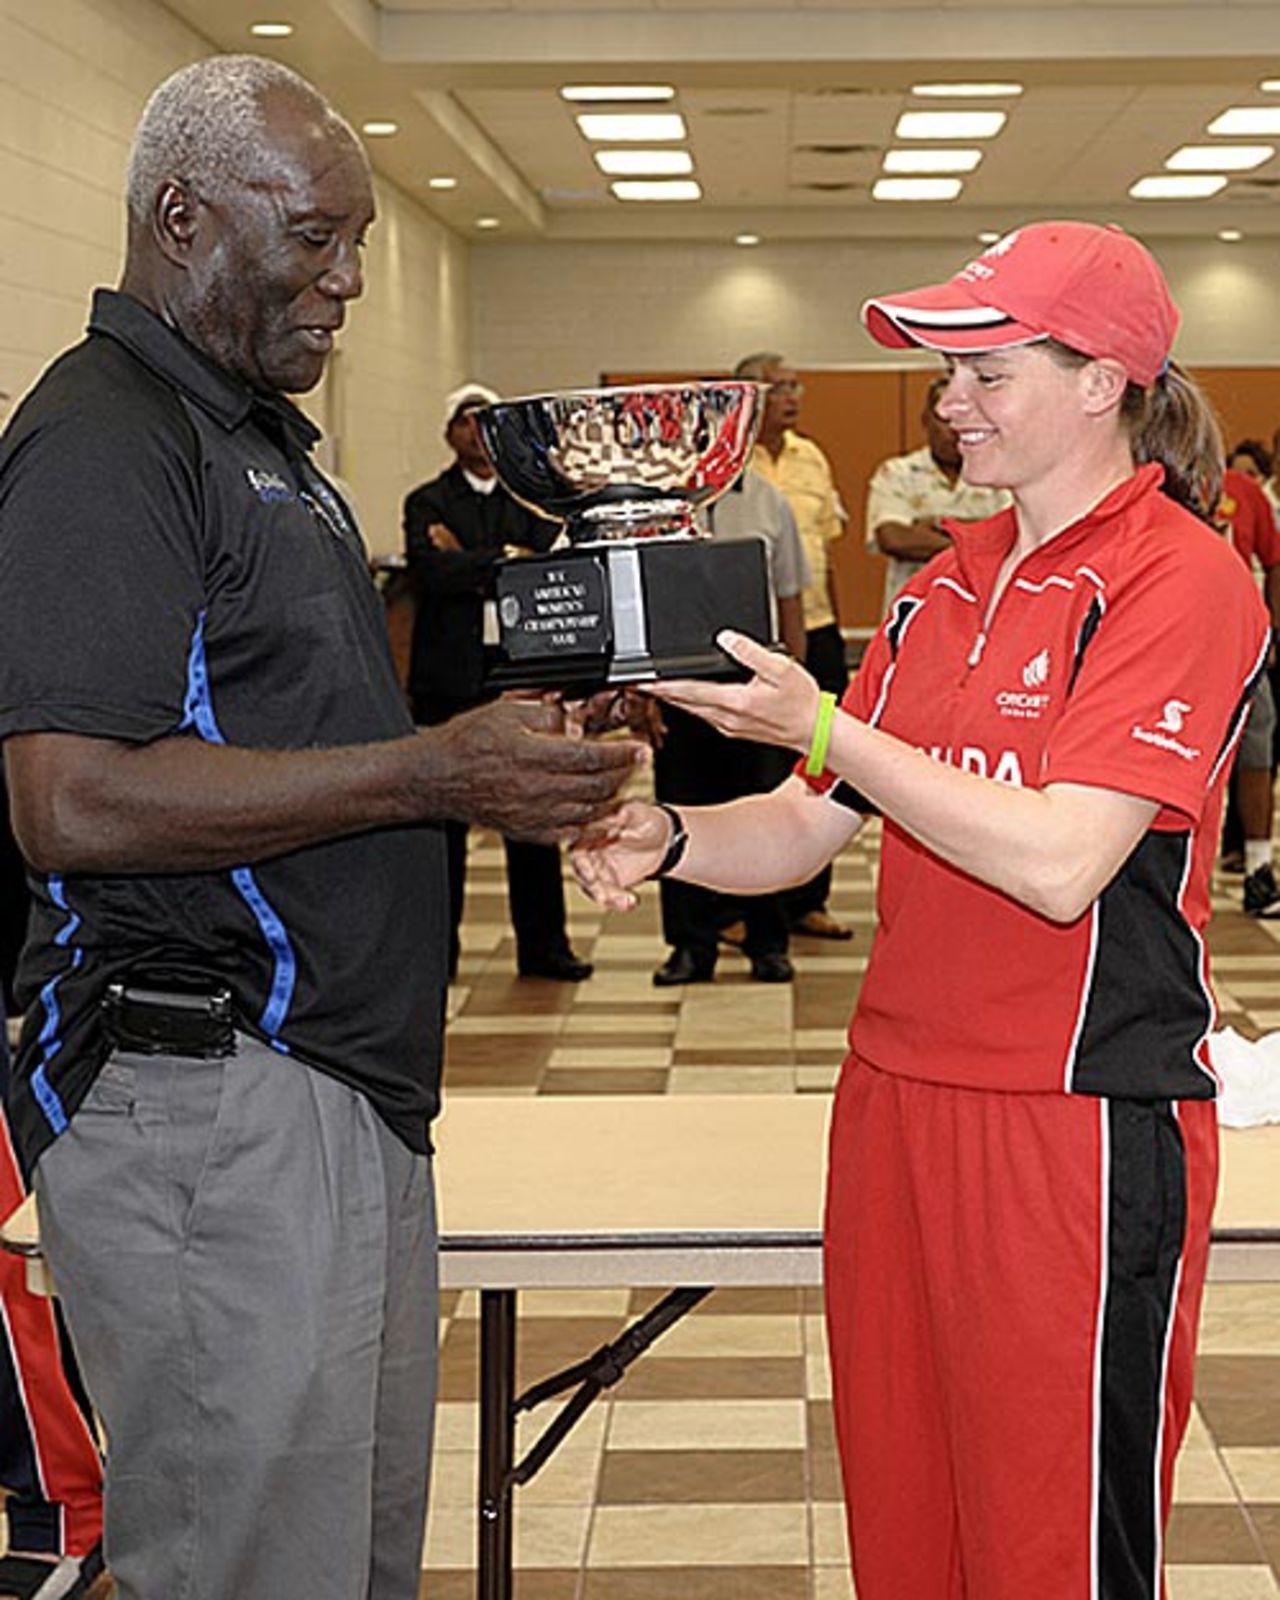 Event co-ordinator Mr.Selwyn Caesar hands the Americas Women's Championship trophy to Canadian captain, Joanna White., Americas Women's Championship 2009, Fort Lauderdale, May 22, 2009